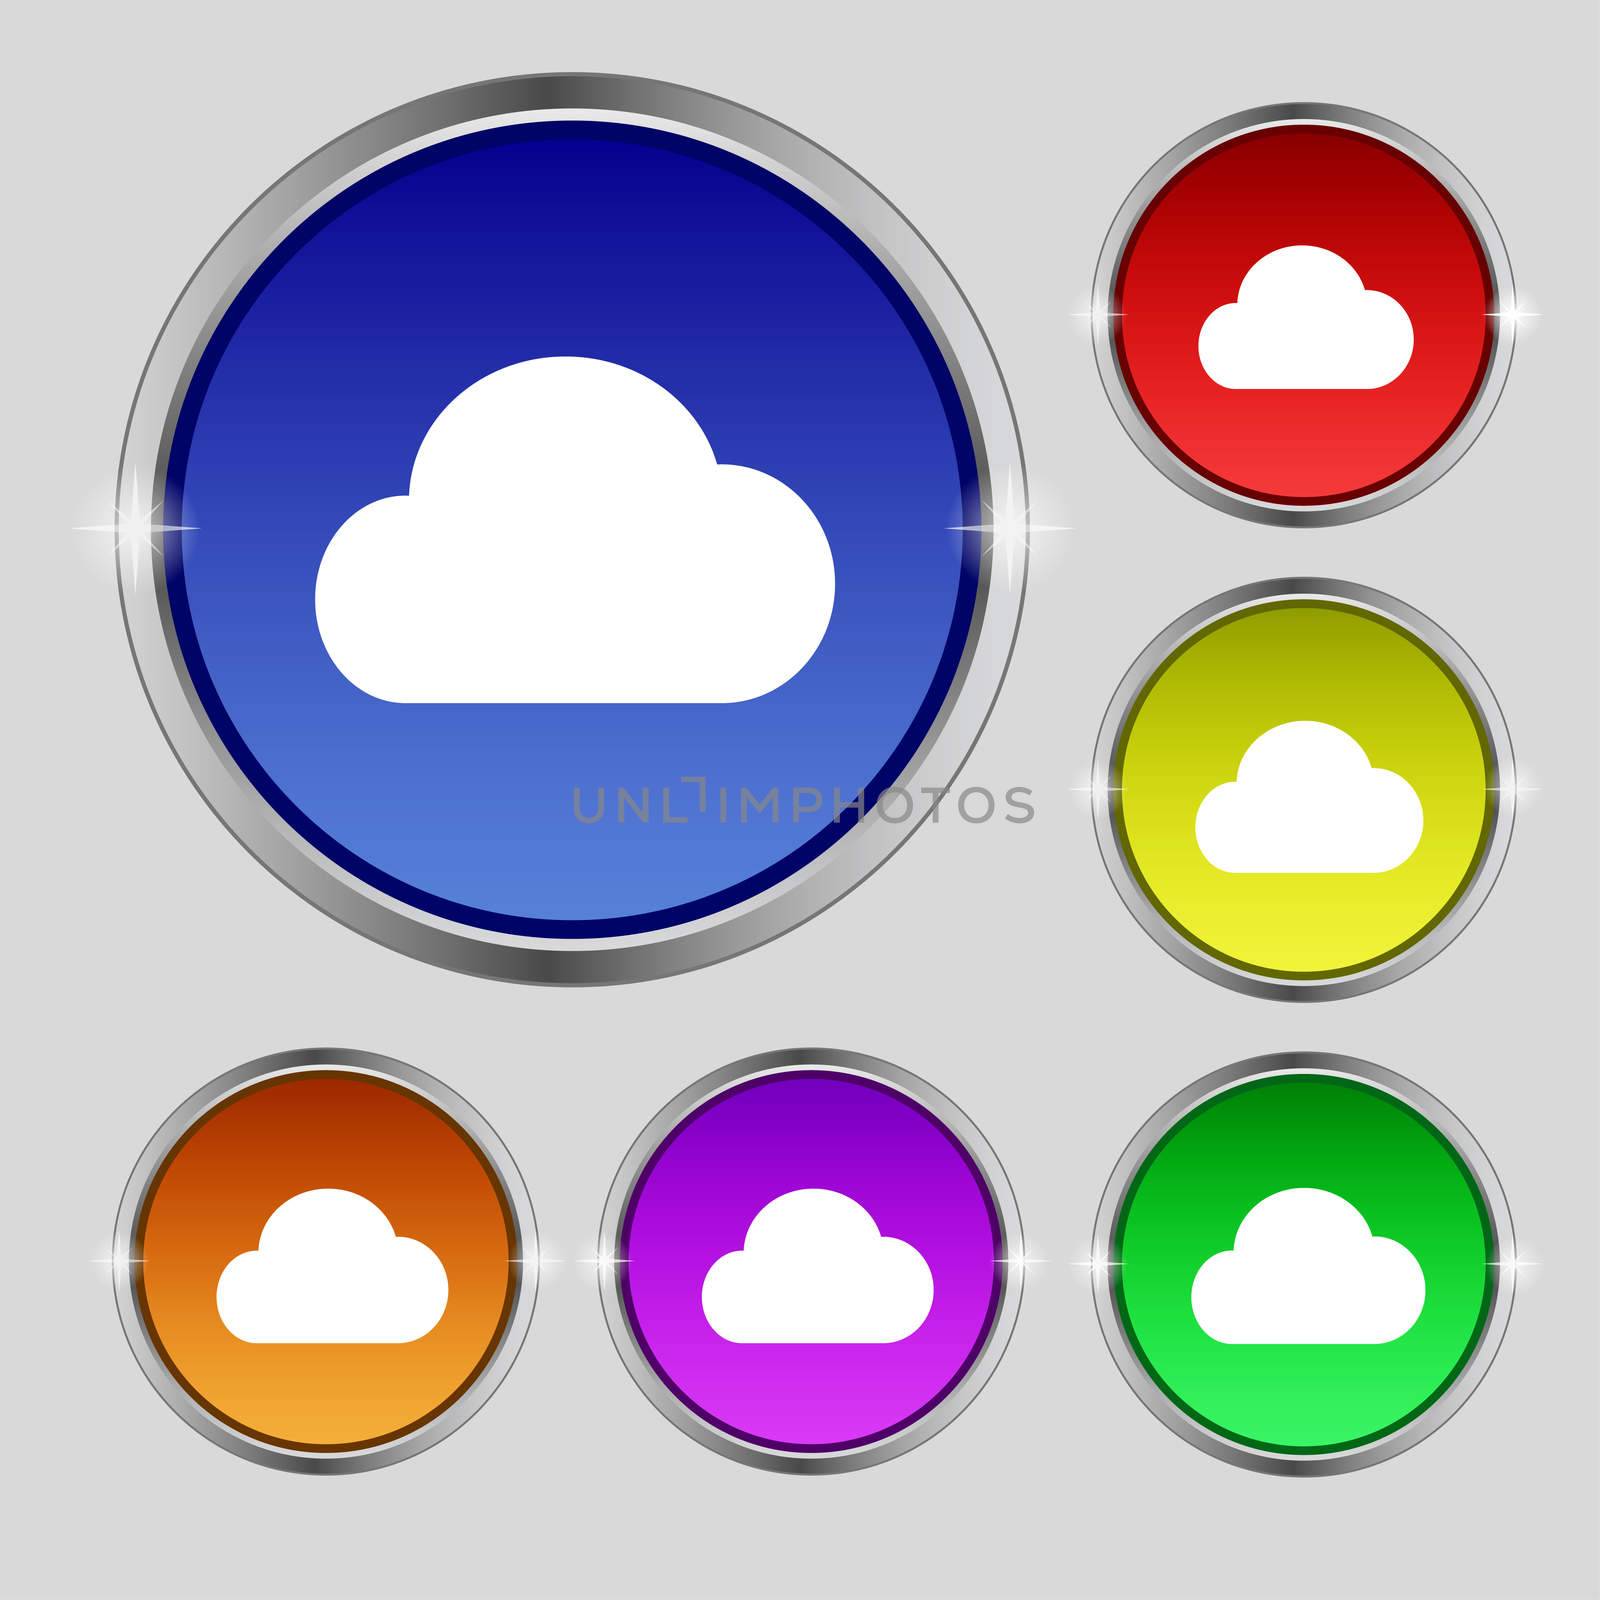 cloud icon sign. Round symbol on bright colourful buttons. illustration